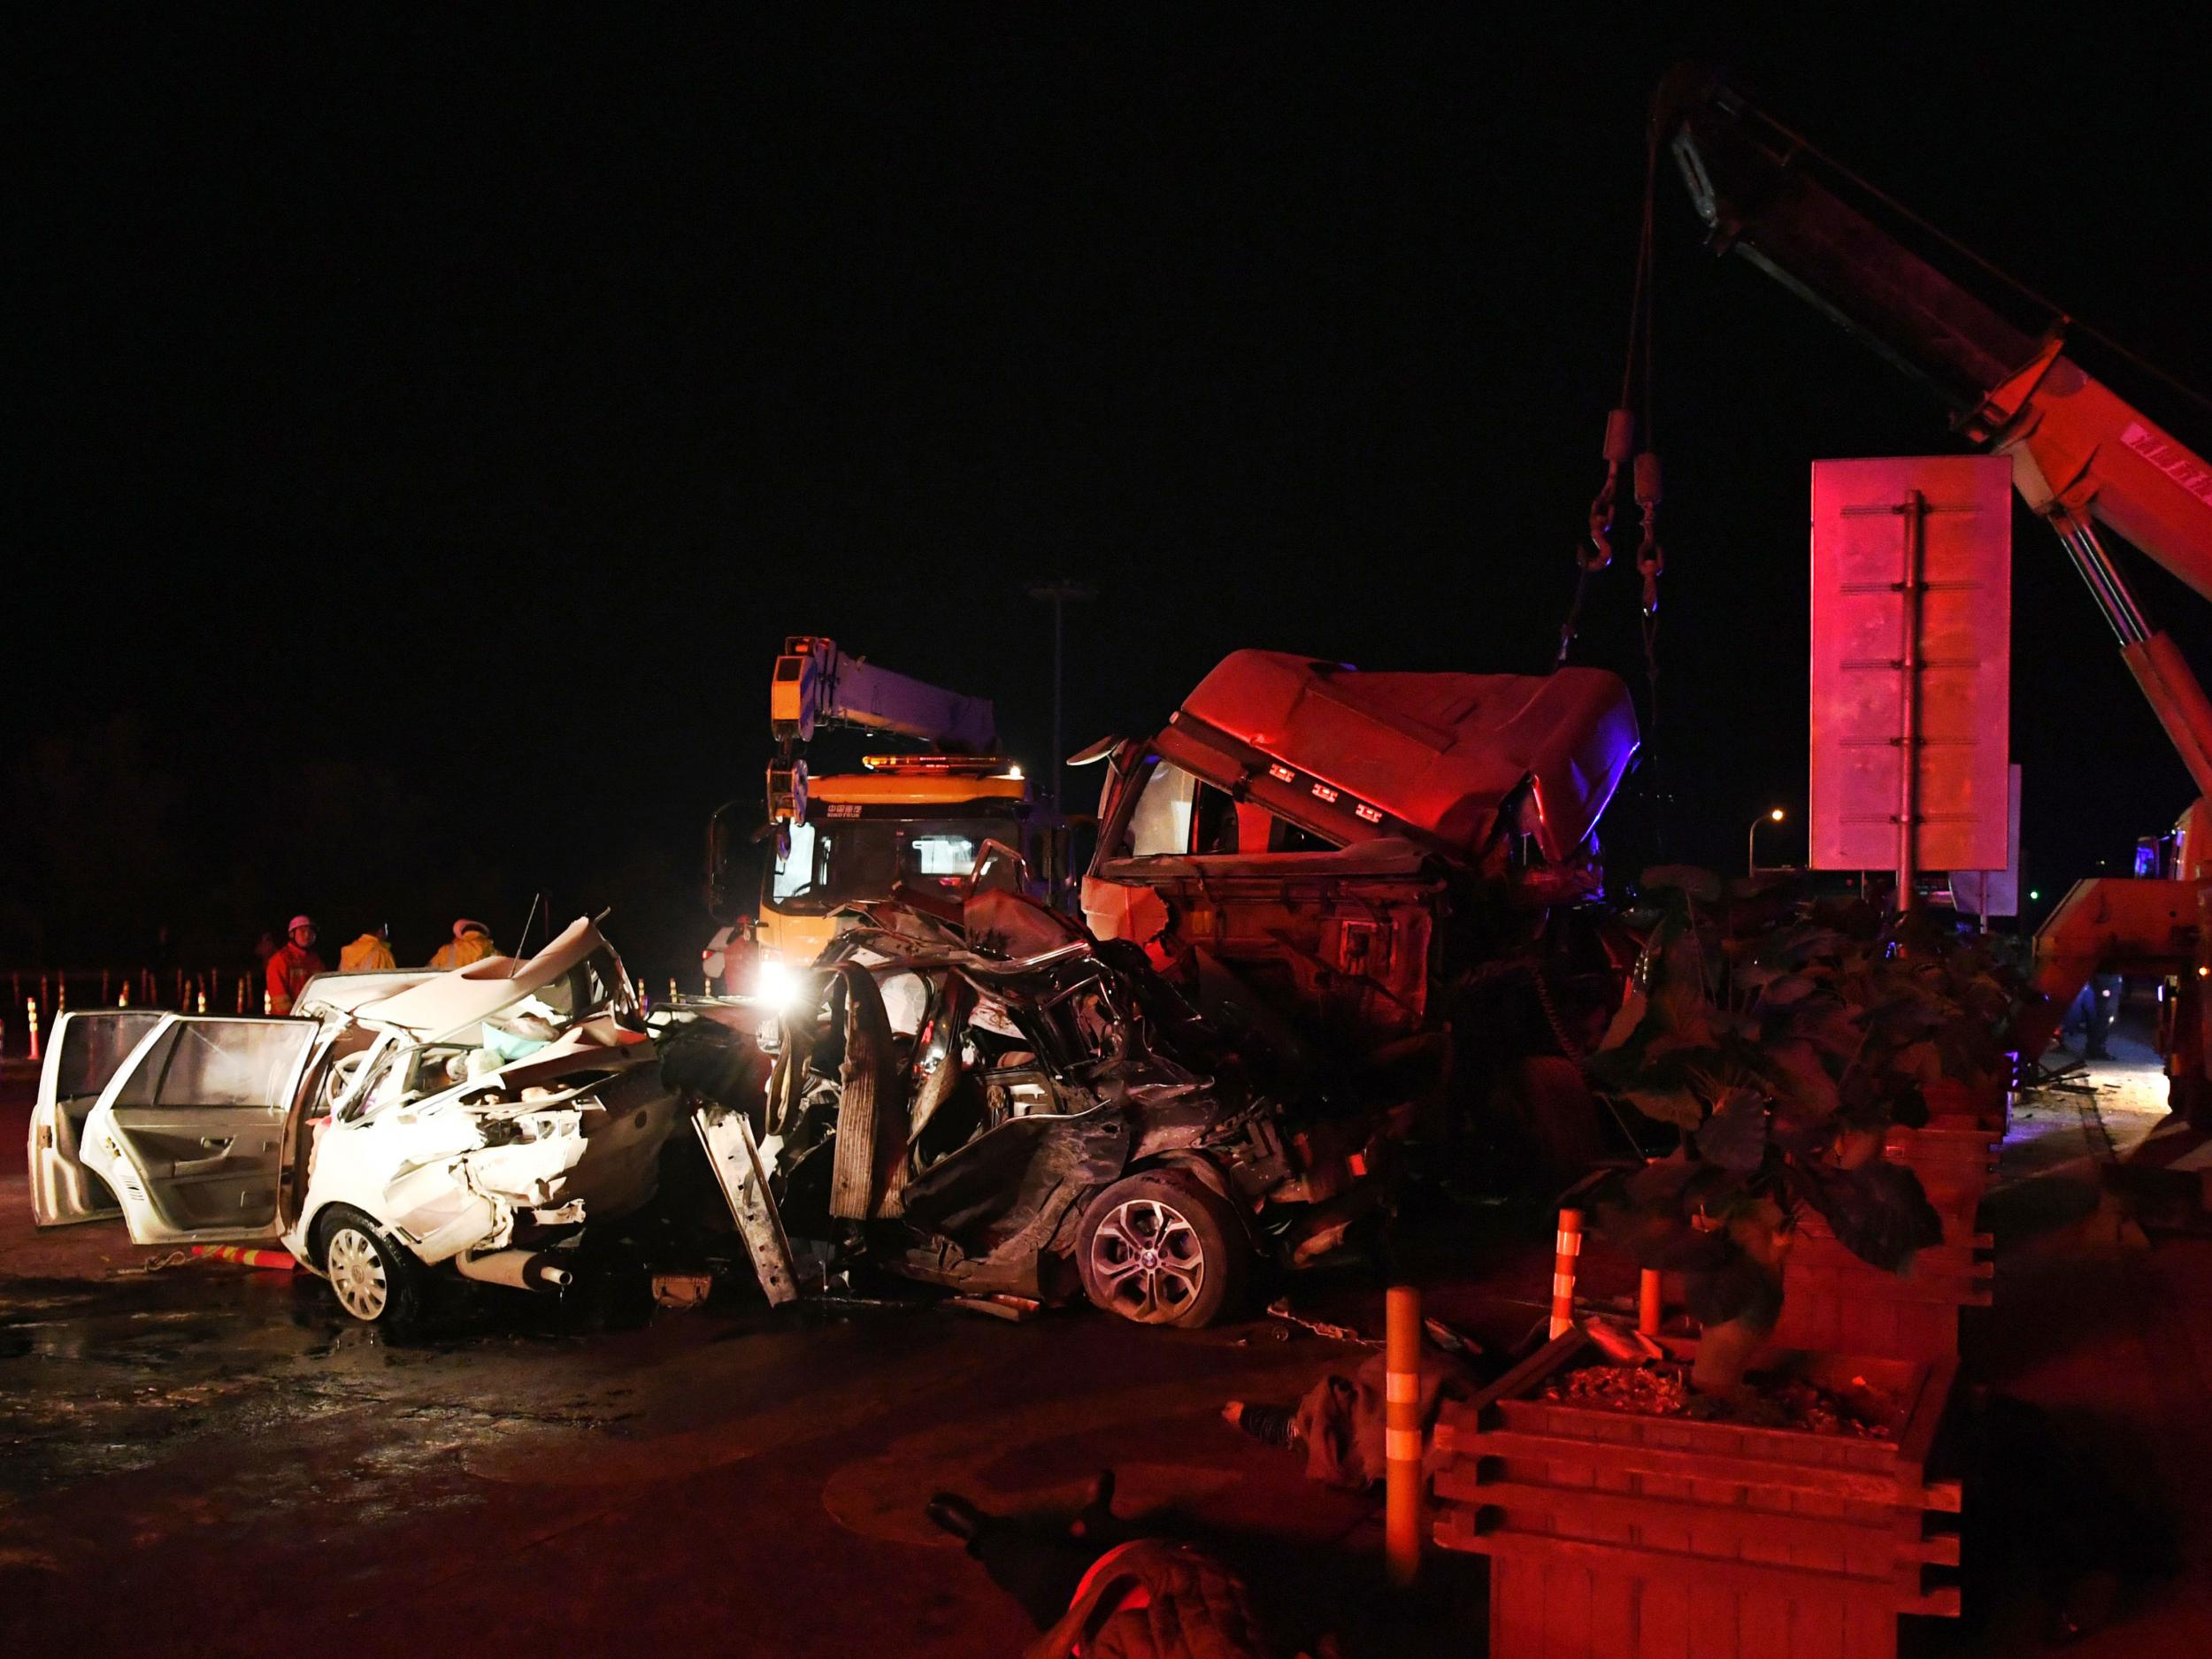 The aftermath of the highway accident in Lanzhou in northwestern China's Gansu province